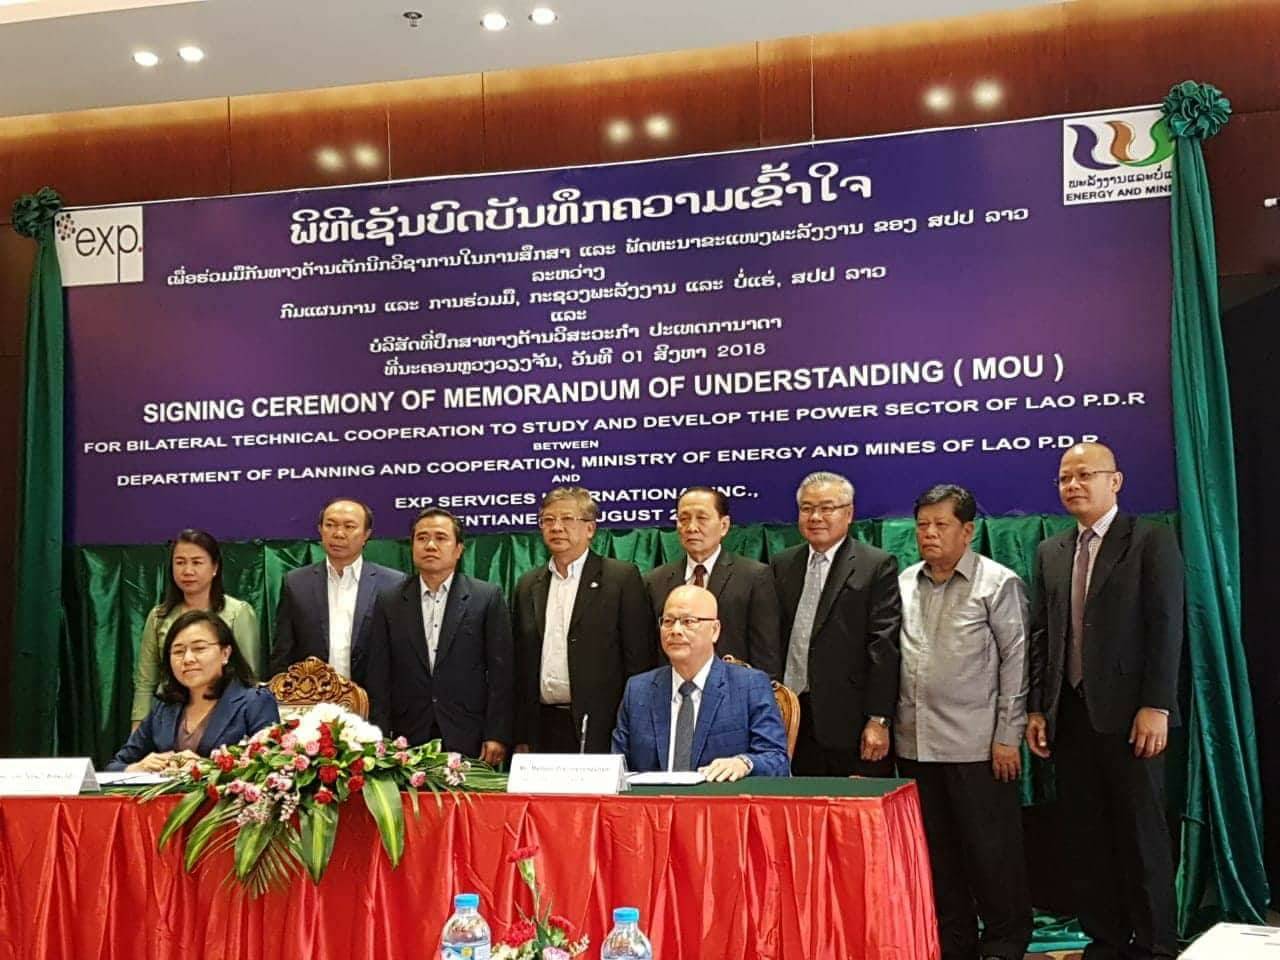 Mathieu Pravongviengkham (pictured right at the table) attends the signing ceremony of new landmark agreement in Laos.